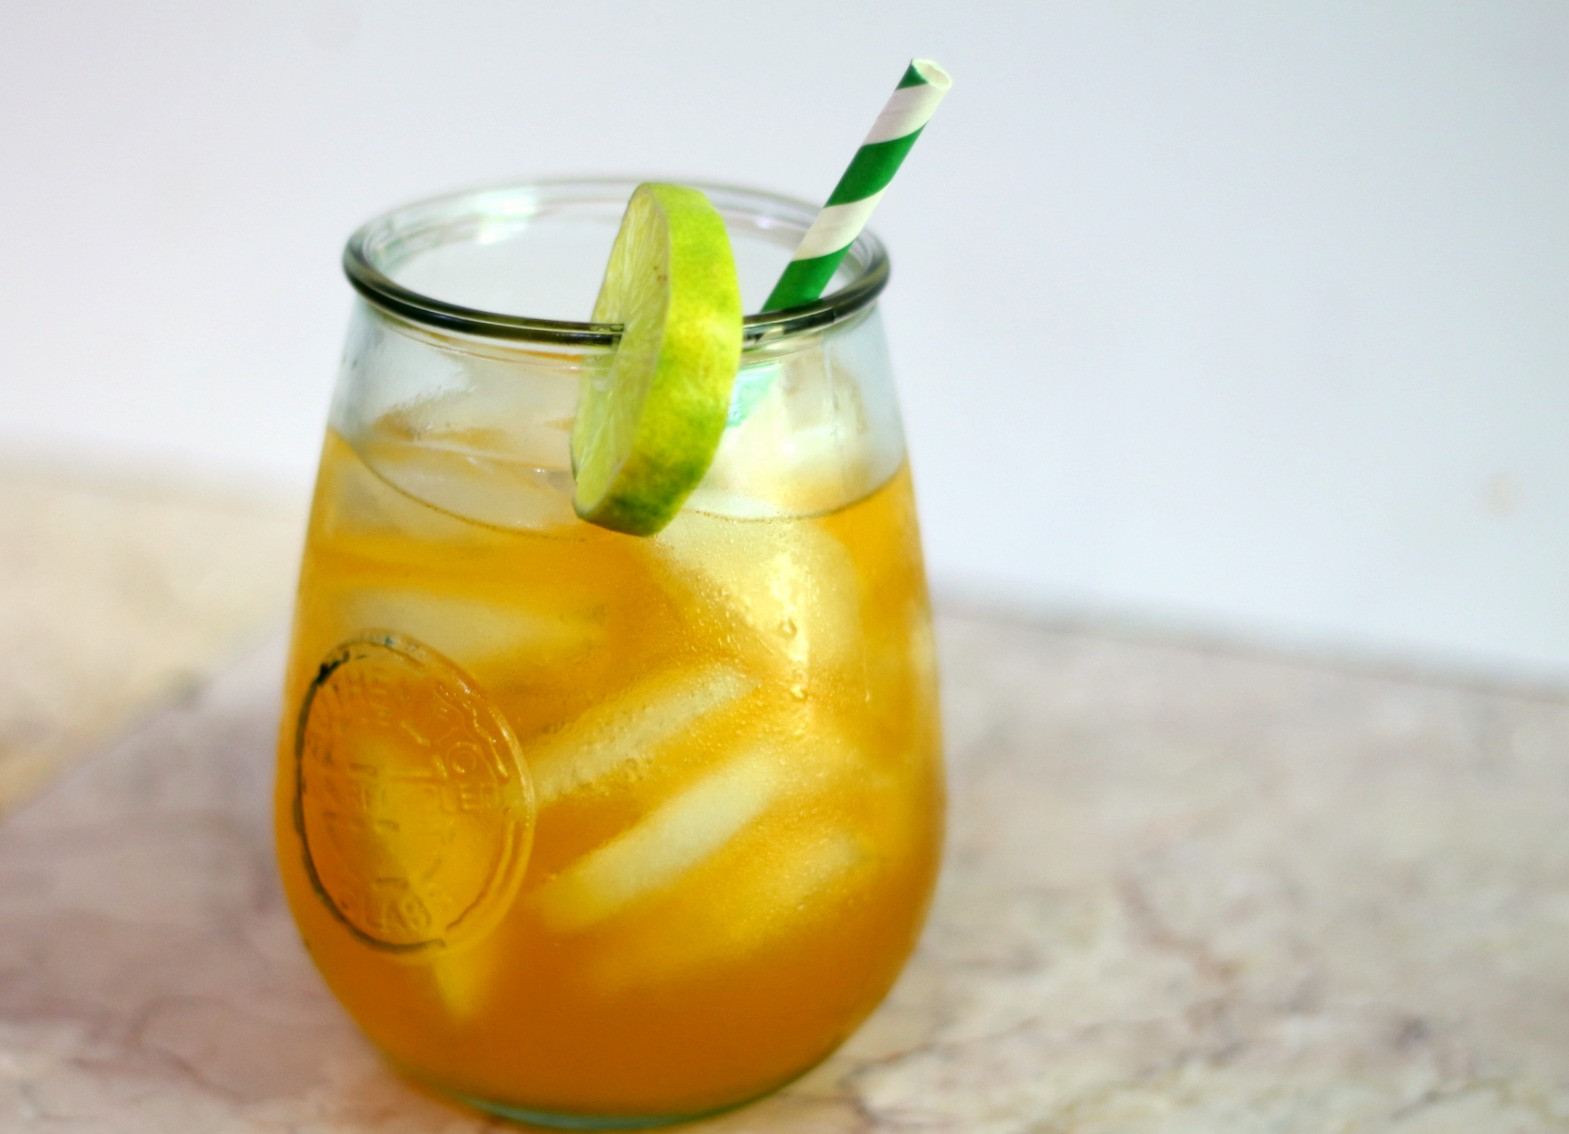 Caribbean Rum Drinks
 Low Carb Caribbean Rum Punch Cocktail Recipe lowcarb ology